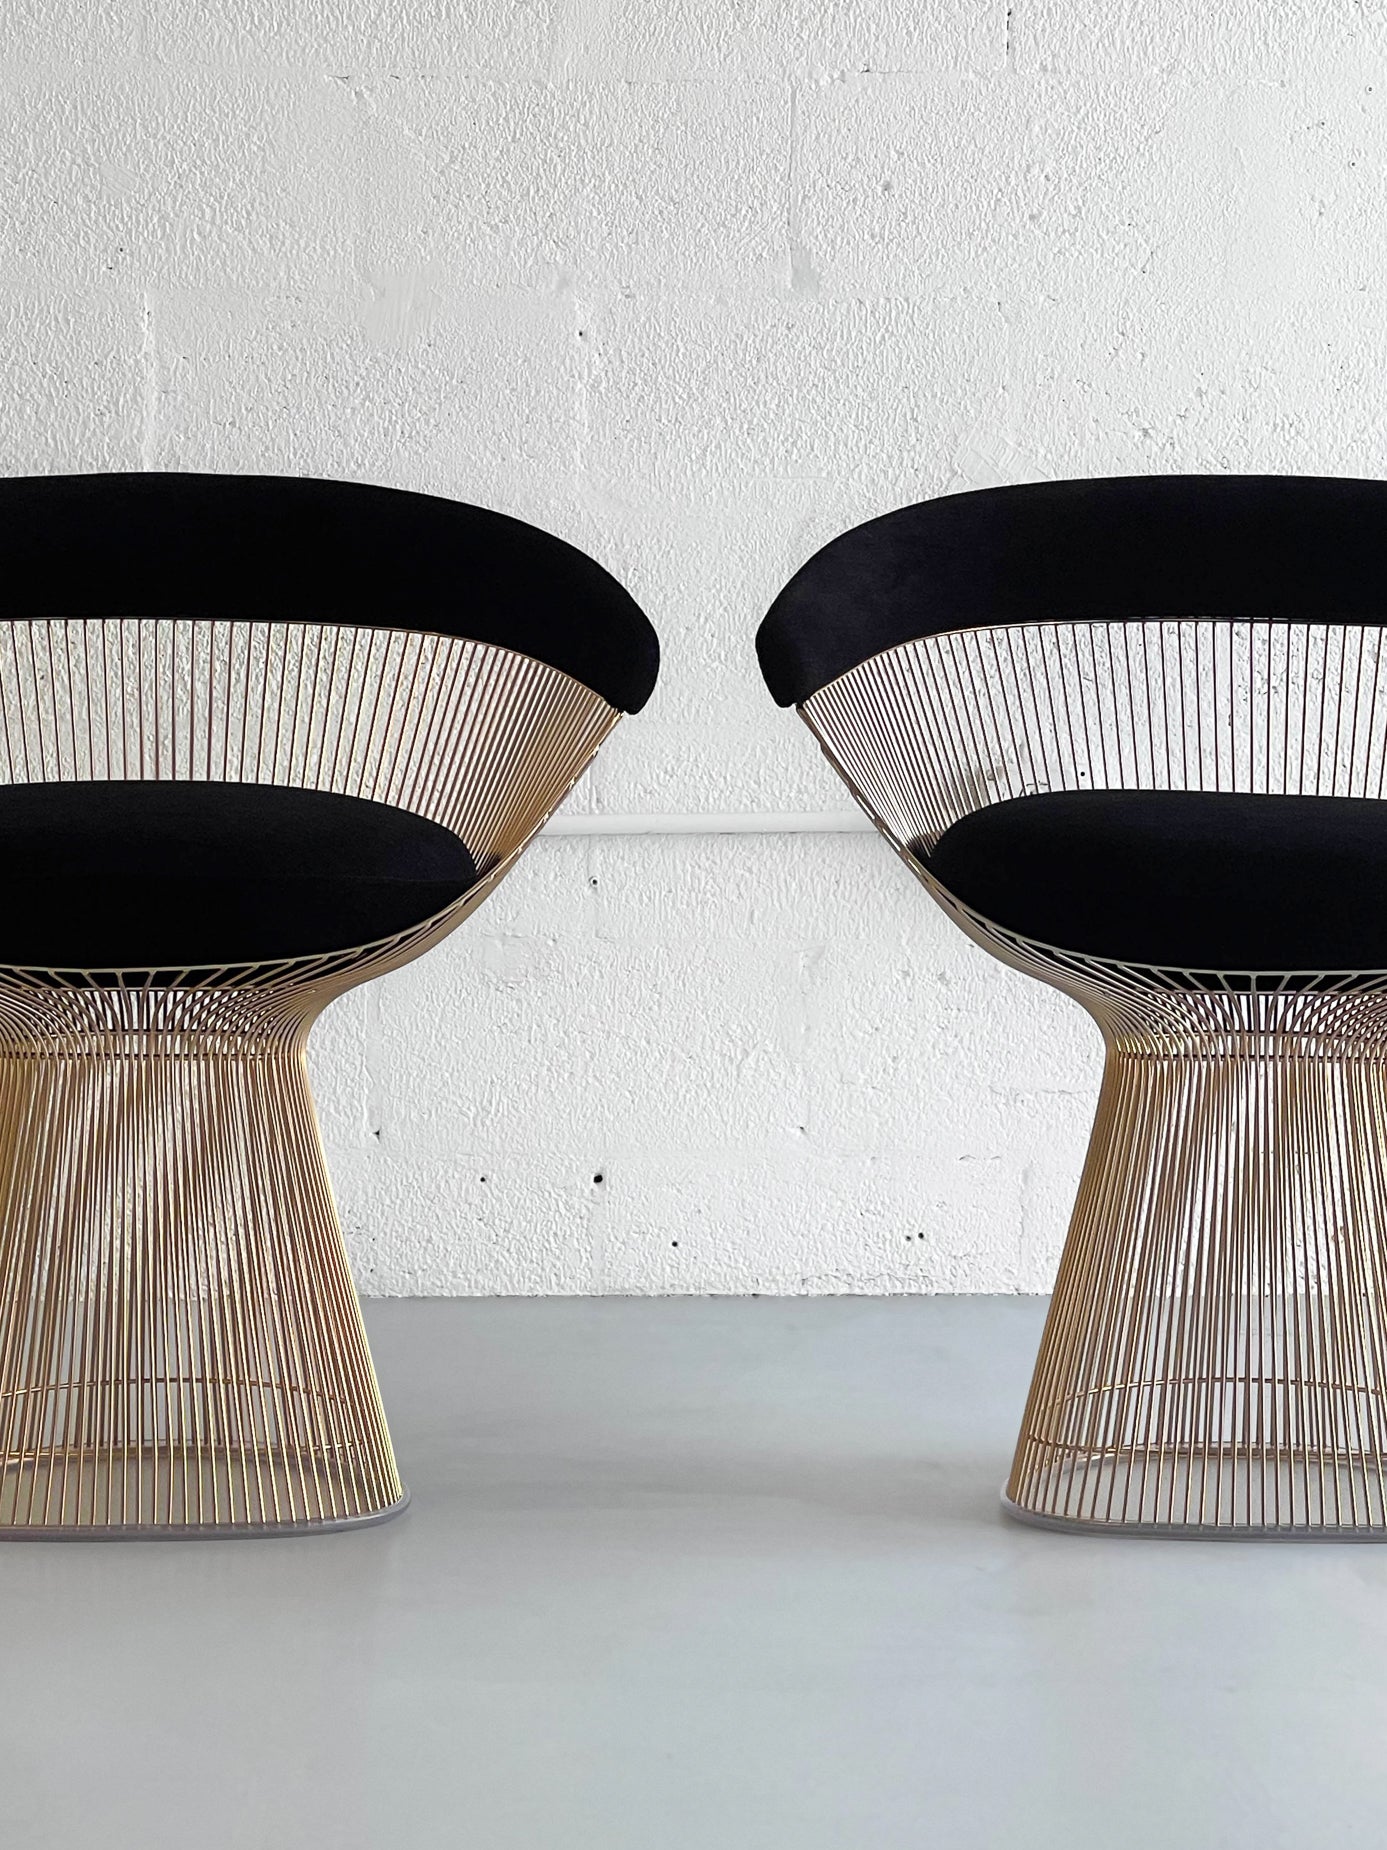 Set of 4 Gold Plated Platner Arm Chairs by Warren Platner for Knoll